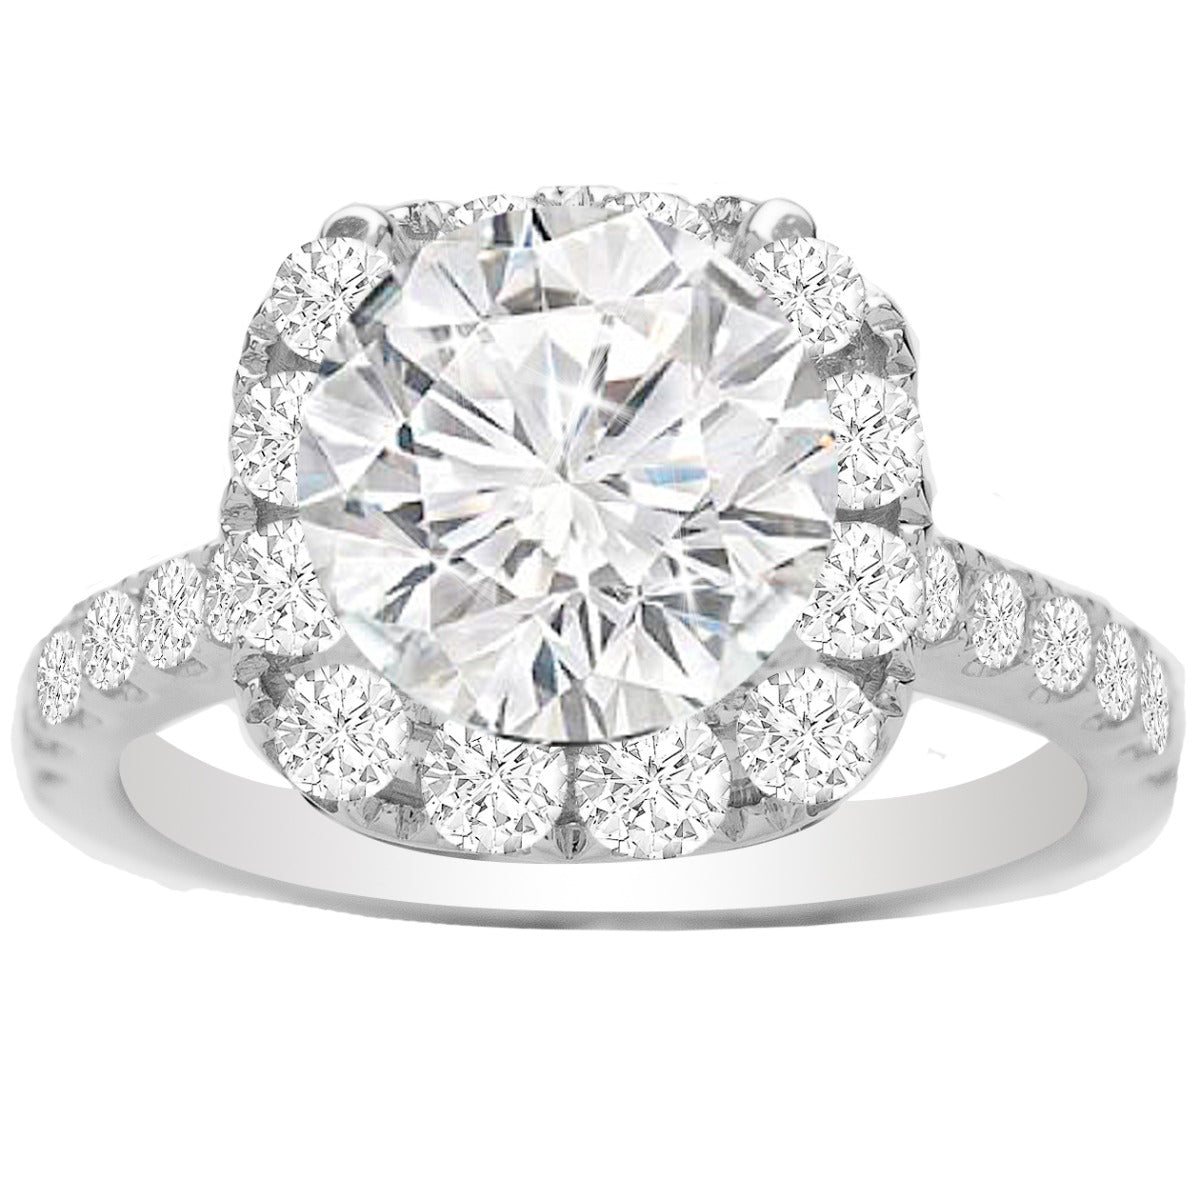 Diamond Halo Engagement Ring in 14K White Gold; 0.90 ctw